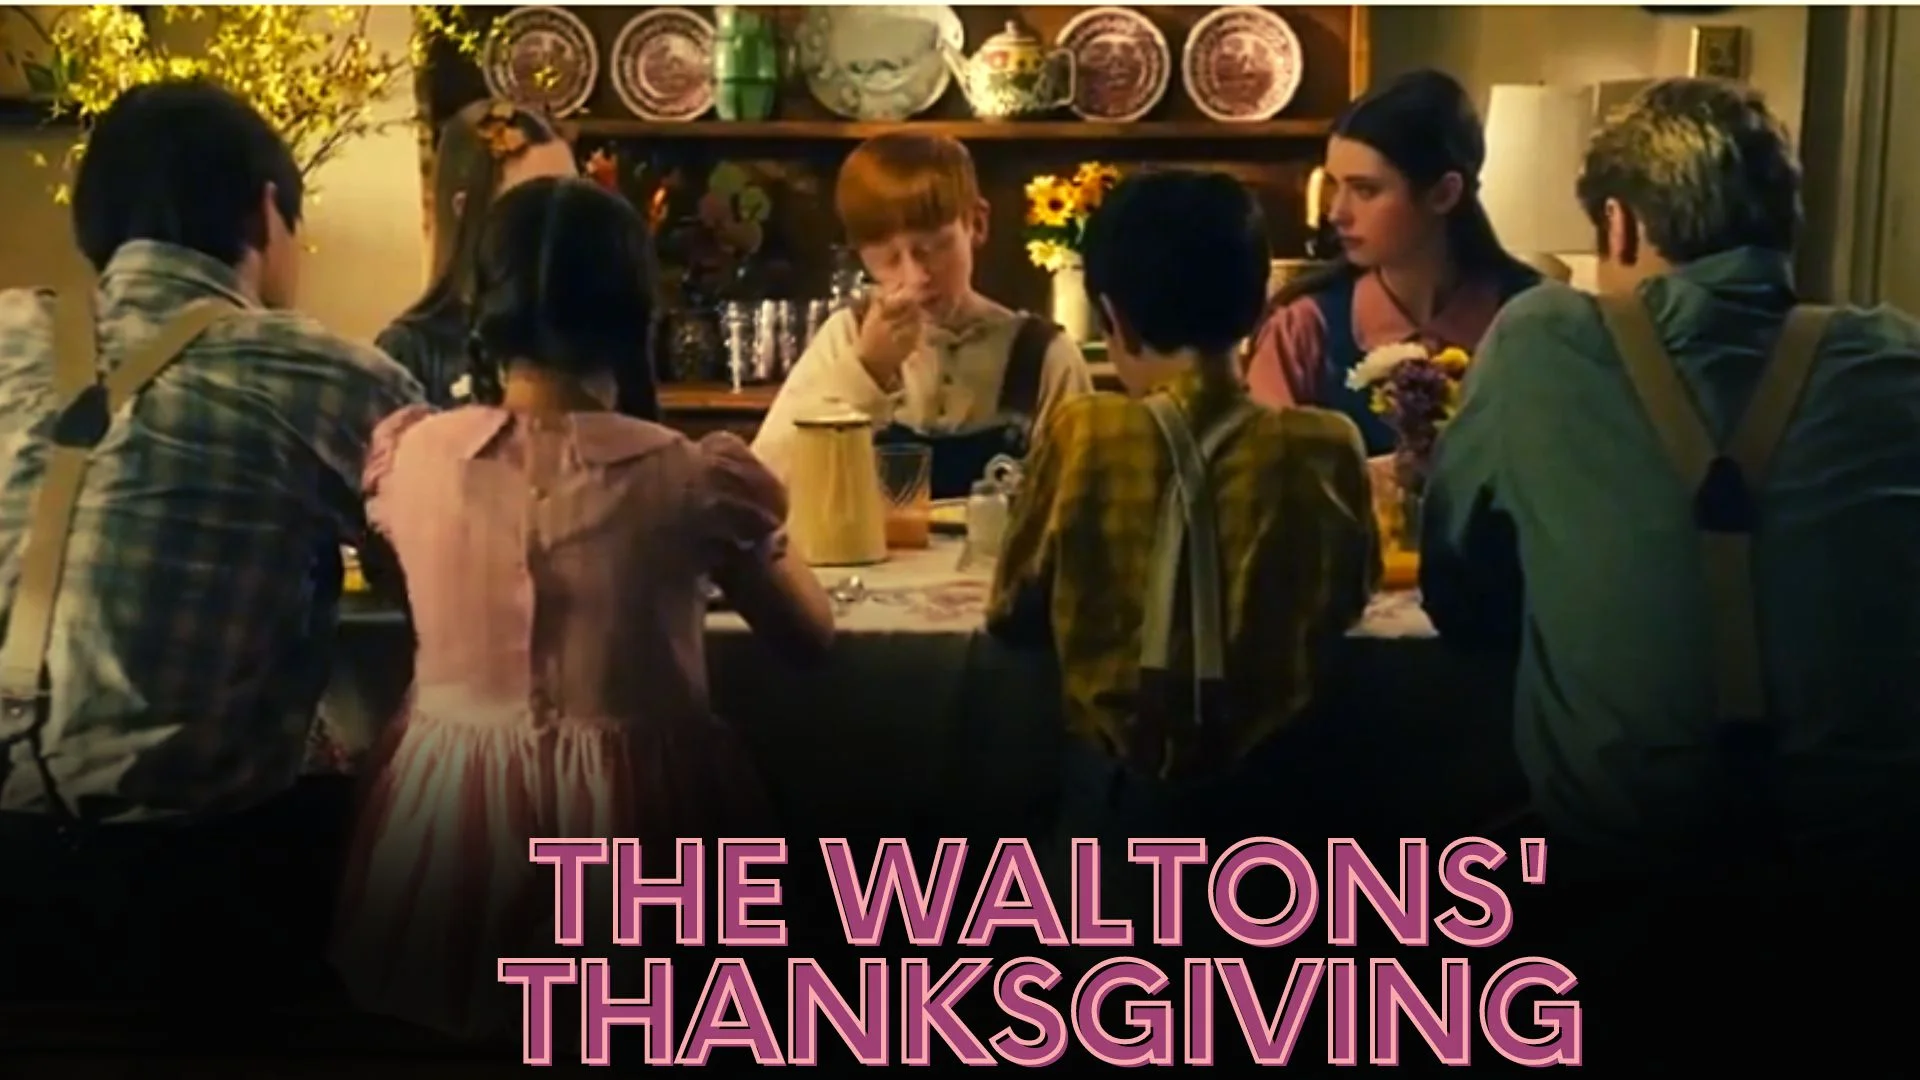 The Waltons' Thanksgiving Parents Guide and Age Rating 2022